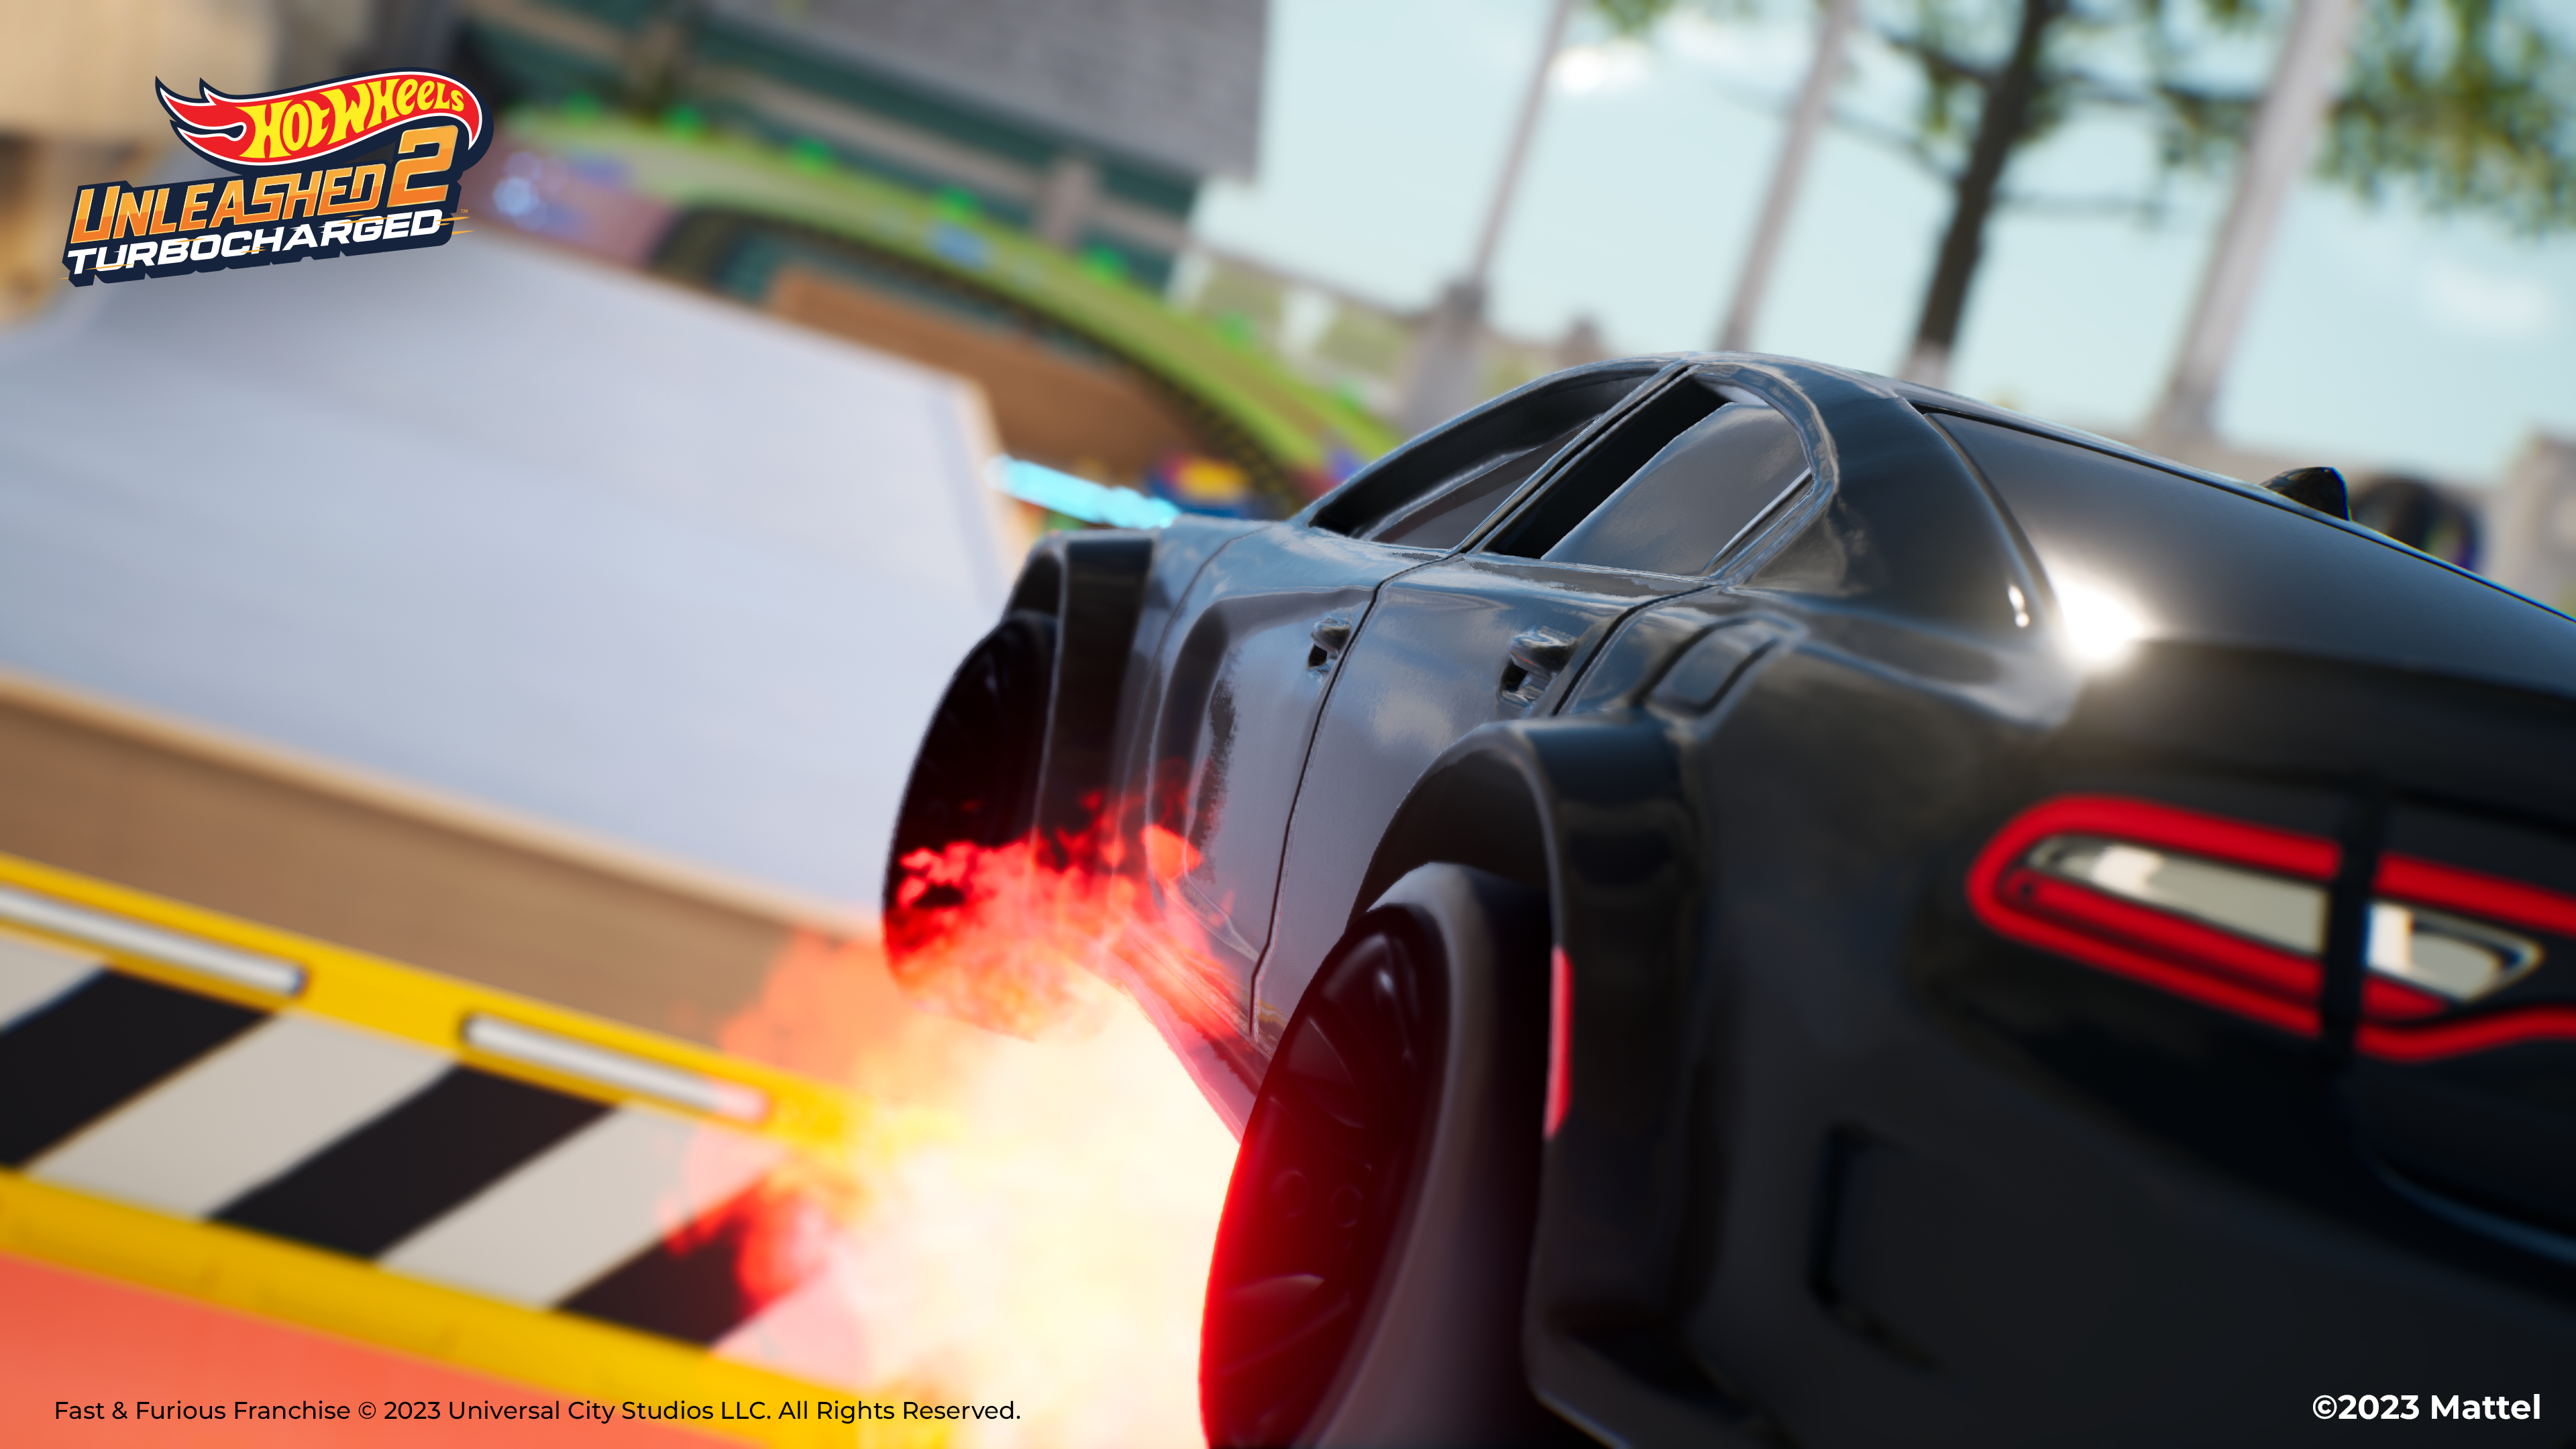 Fast Hot Wheels 2: Feature Furious Turbocharged & Cars Unleashed to